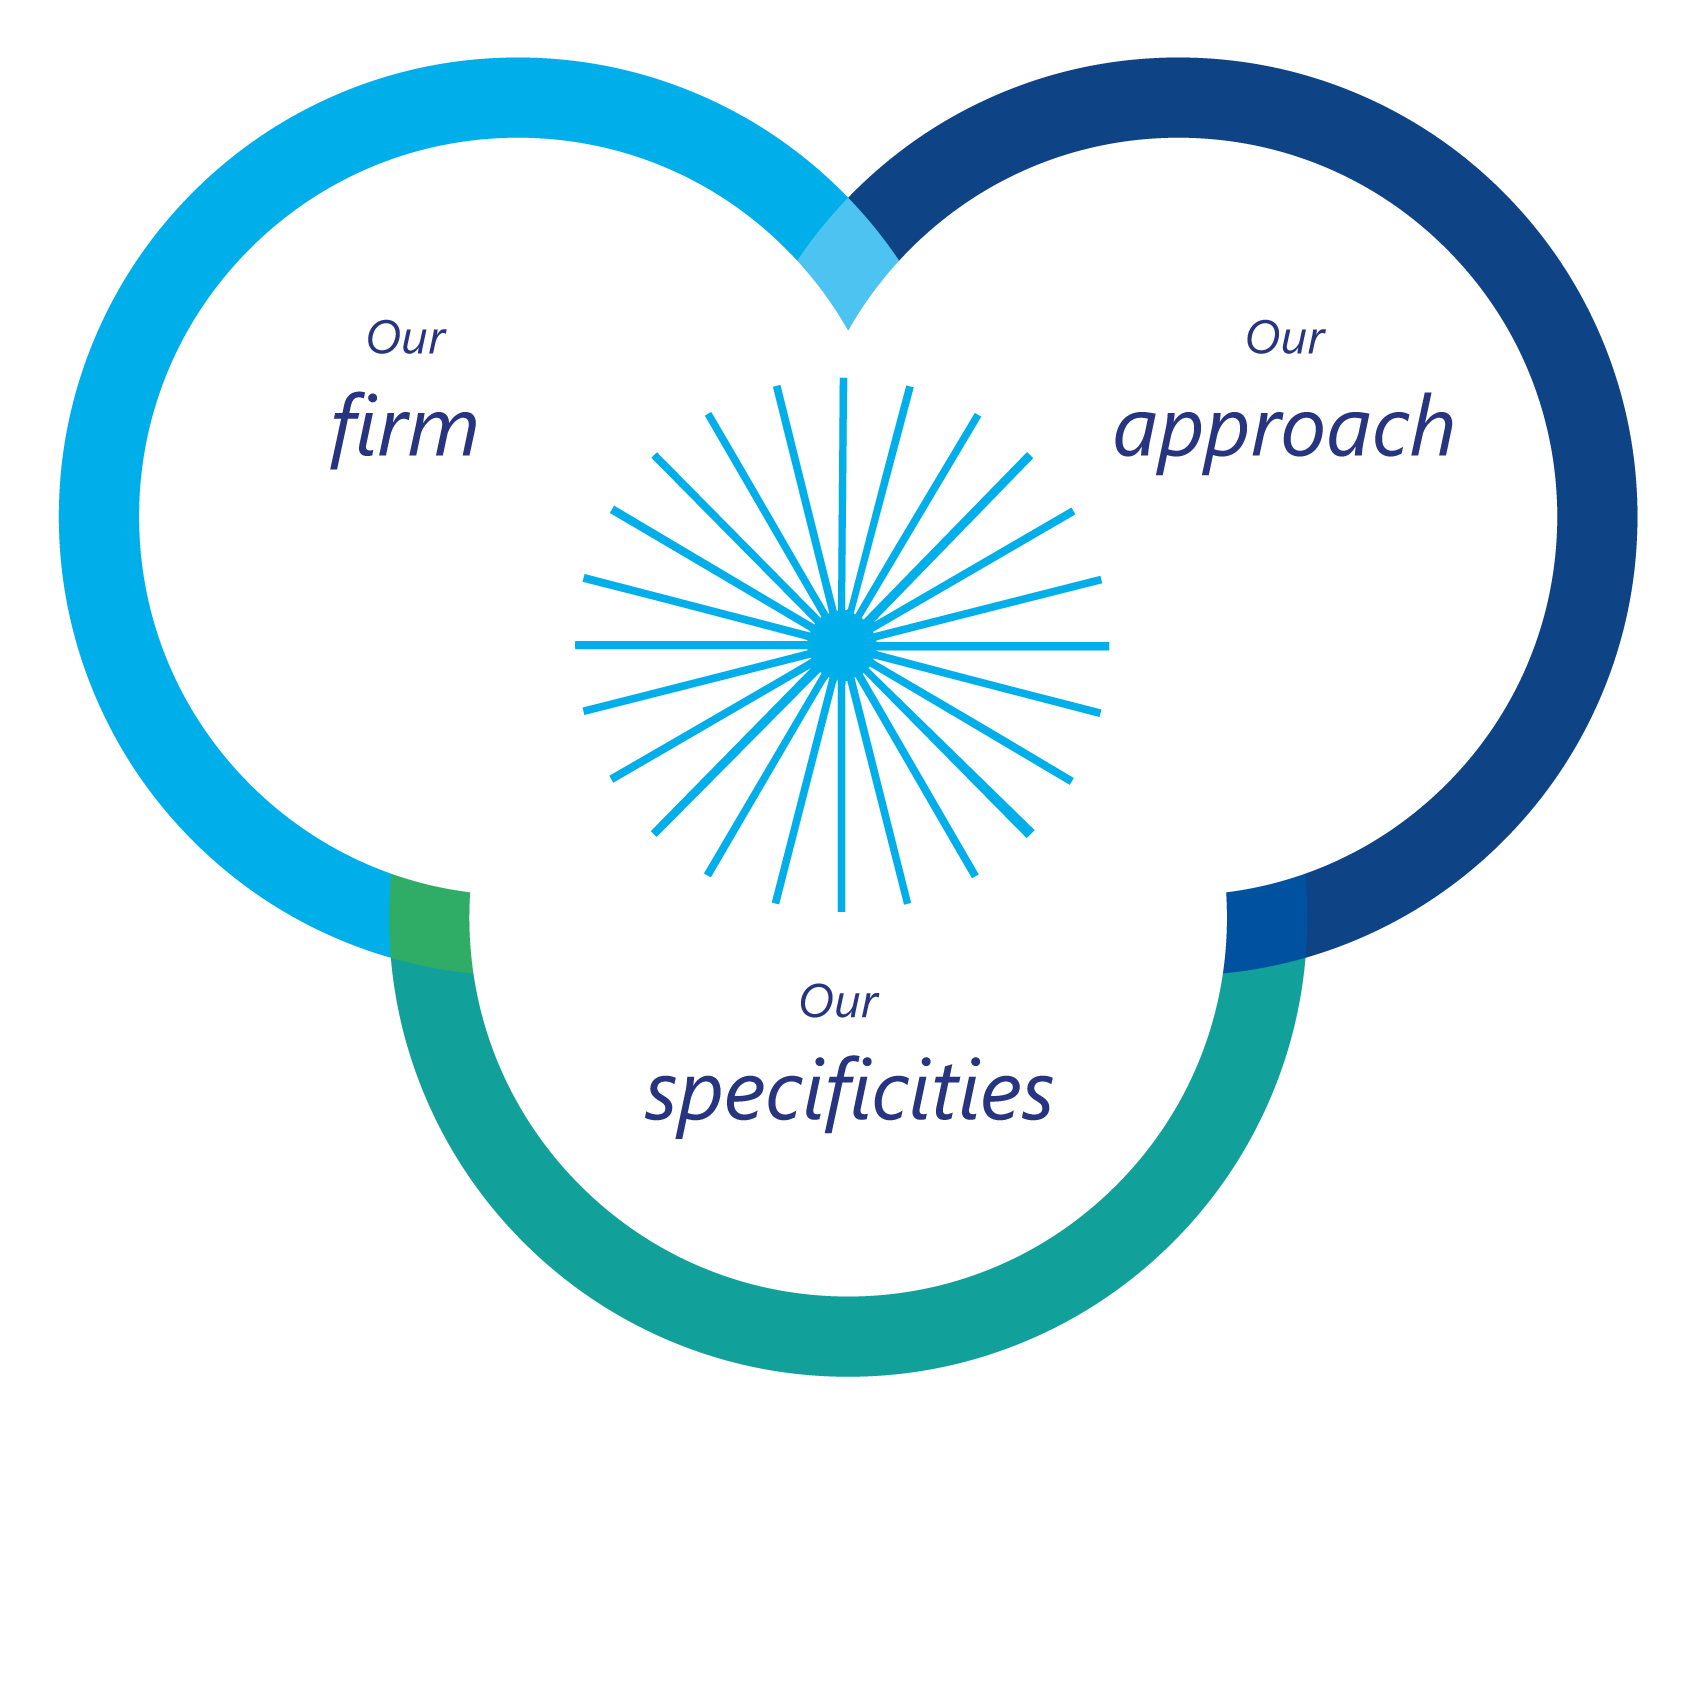 Mageia Partners - Our firm, Our approach, our specificites